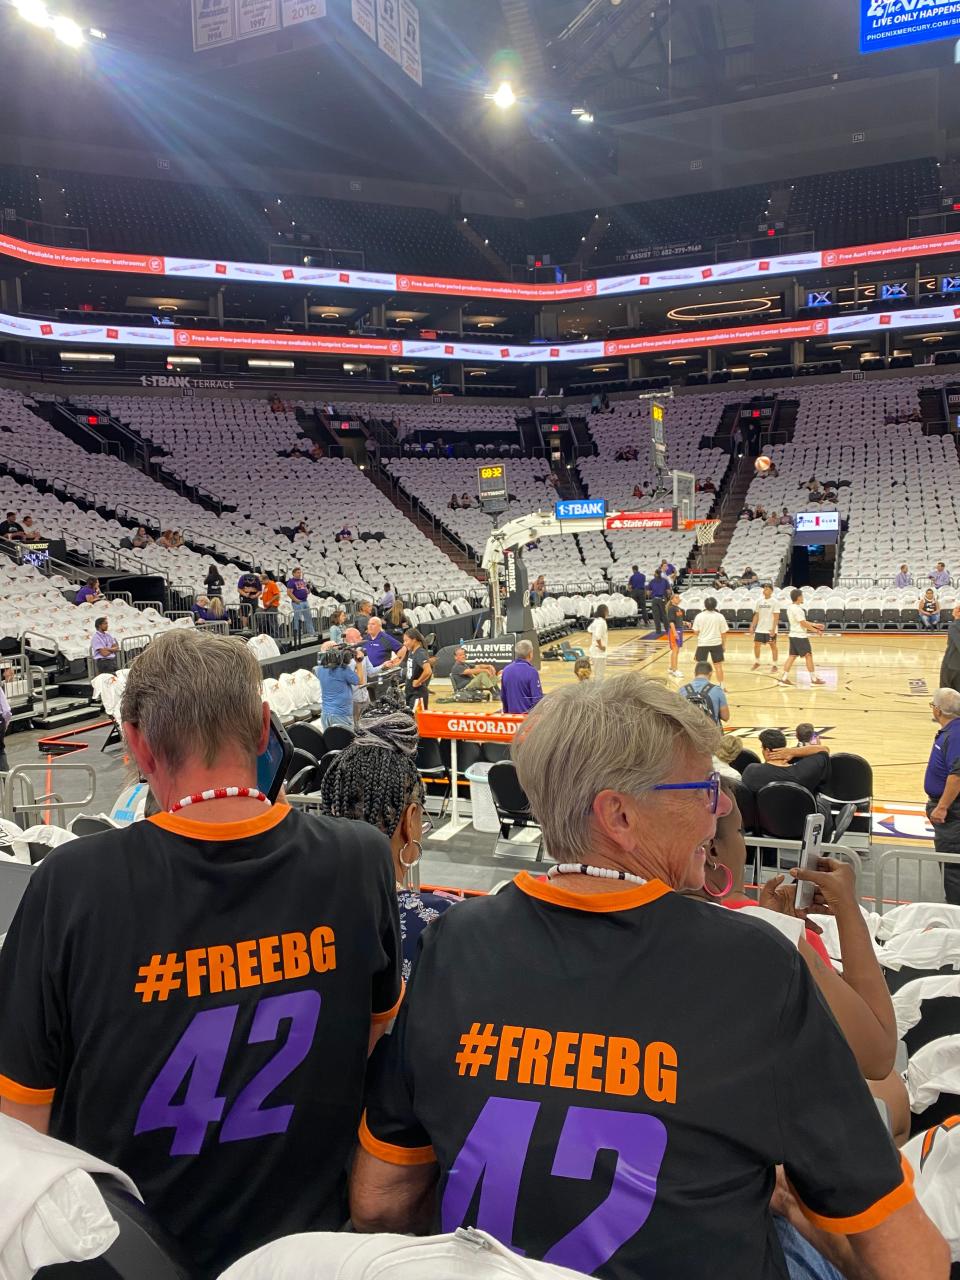 A.J. McRae and JoAnn McRae wear "#FreeBG 42" shirts at a WNBA basketball game between the Mercury and the Las Vegas Aces, Friday, May 6, 2022, in Phoenix.